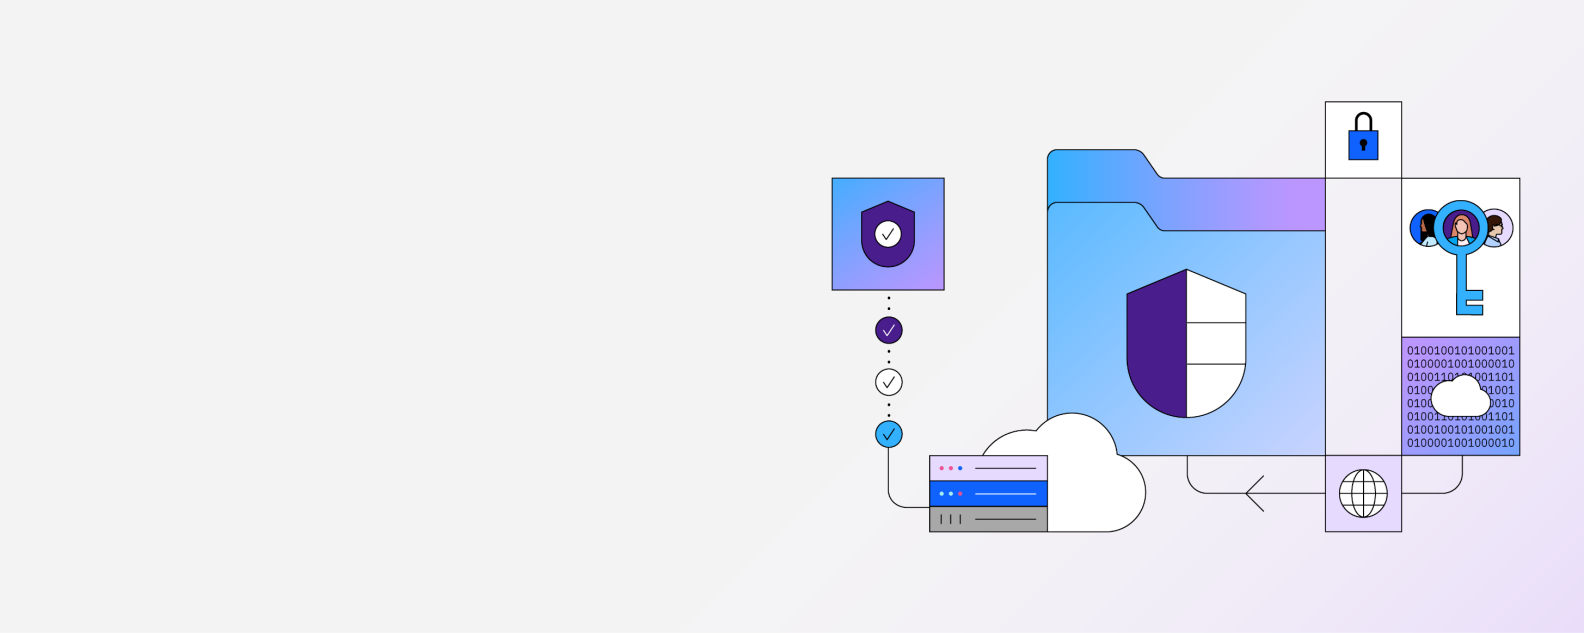 Illustrative hybrid UI image for data security and protection